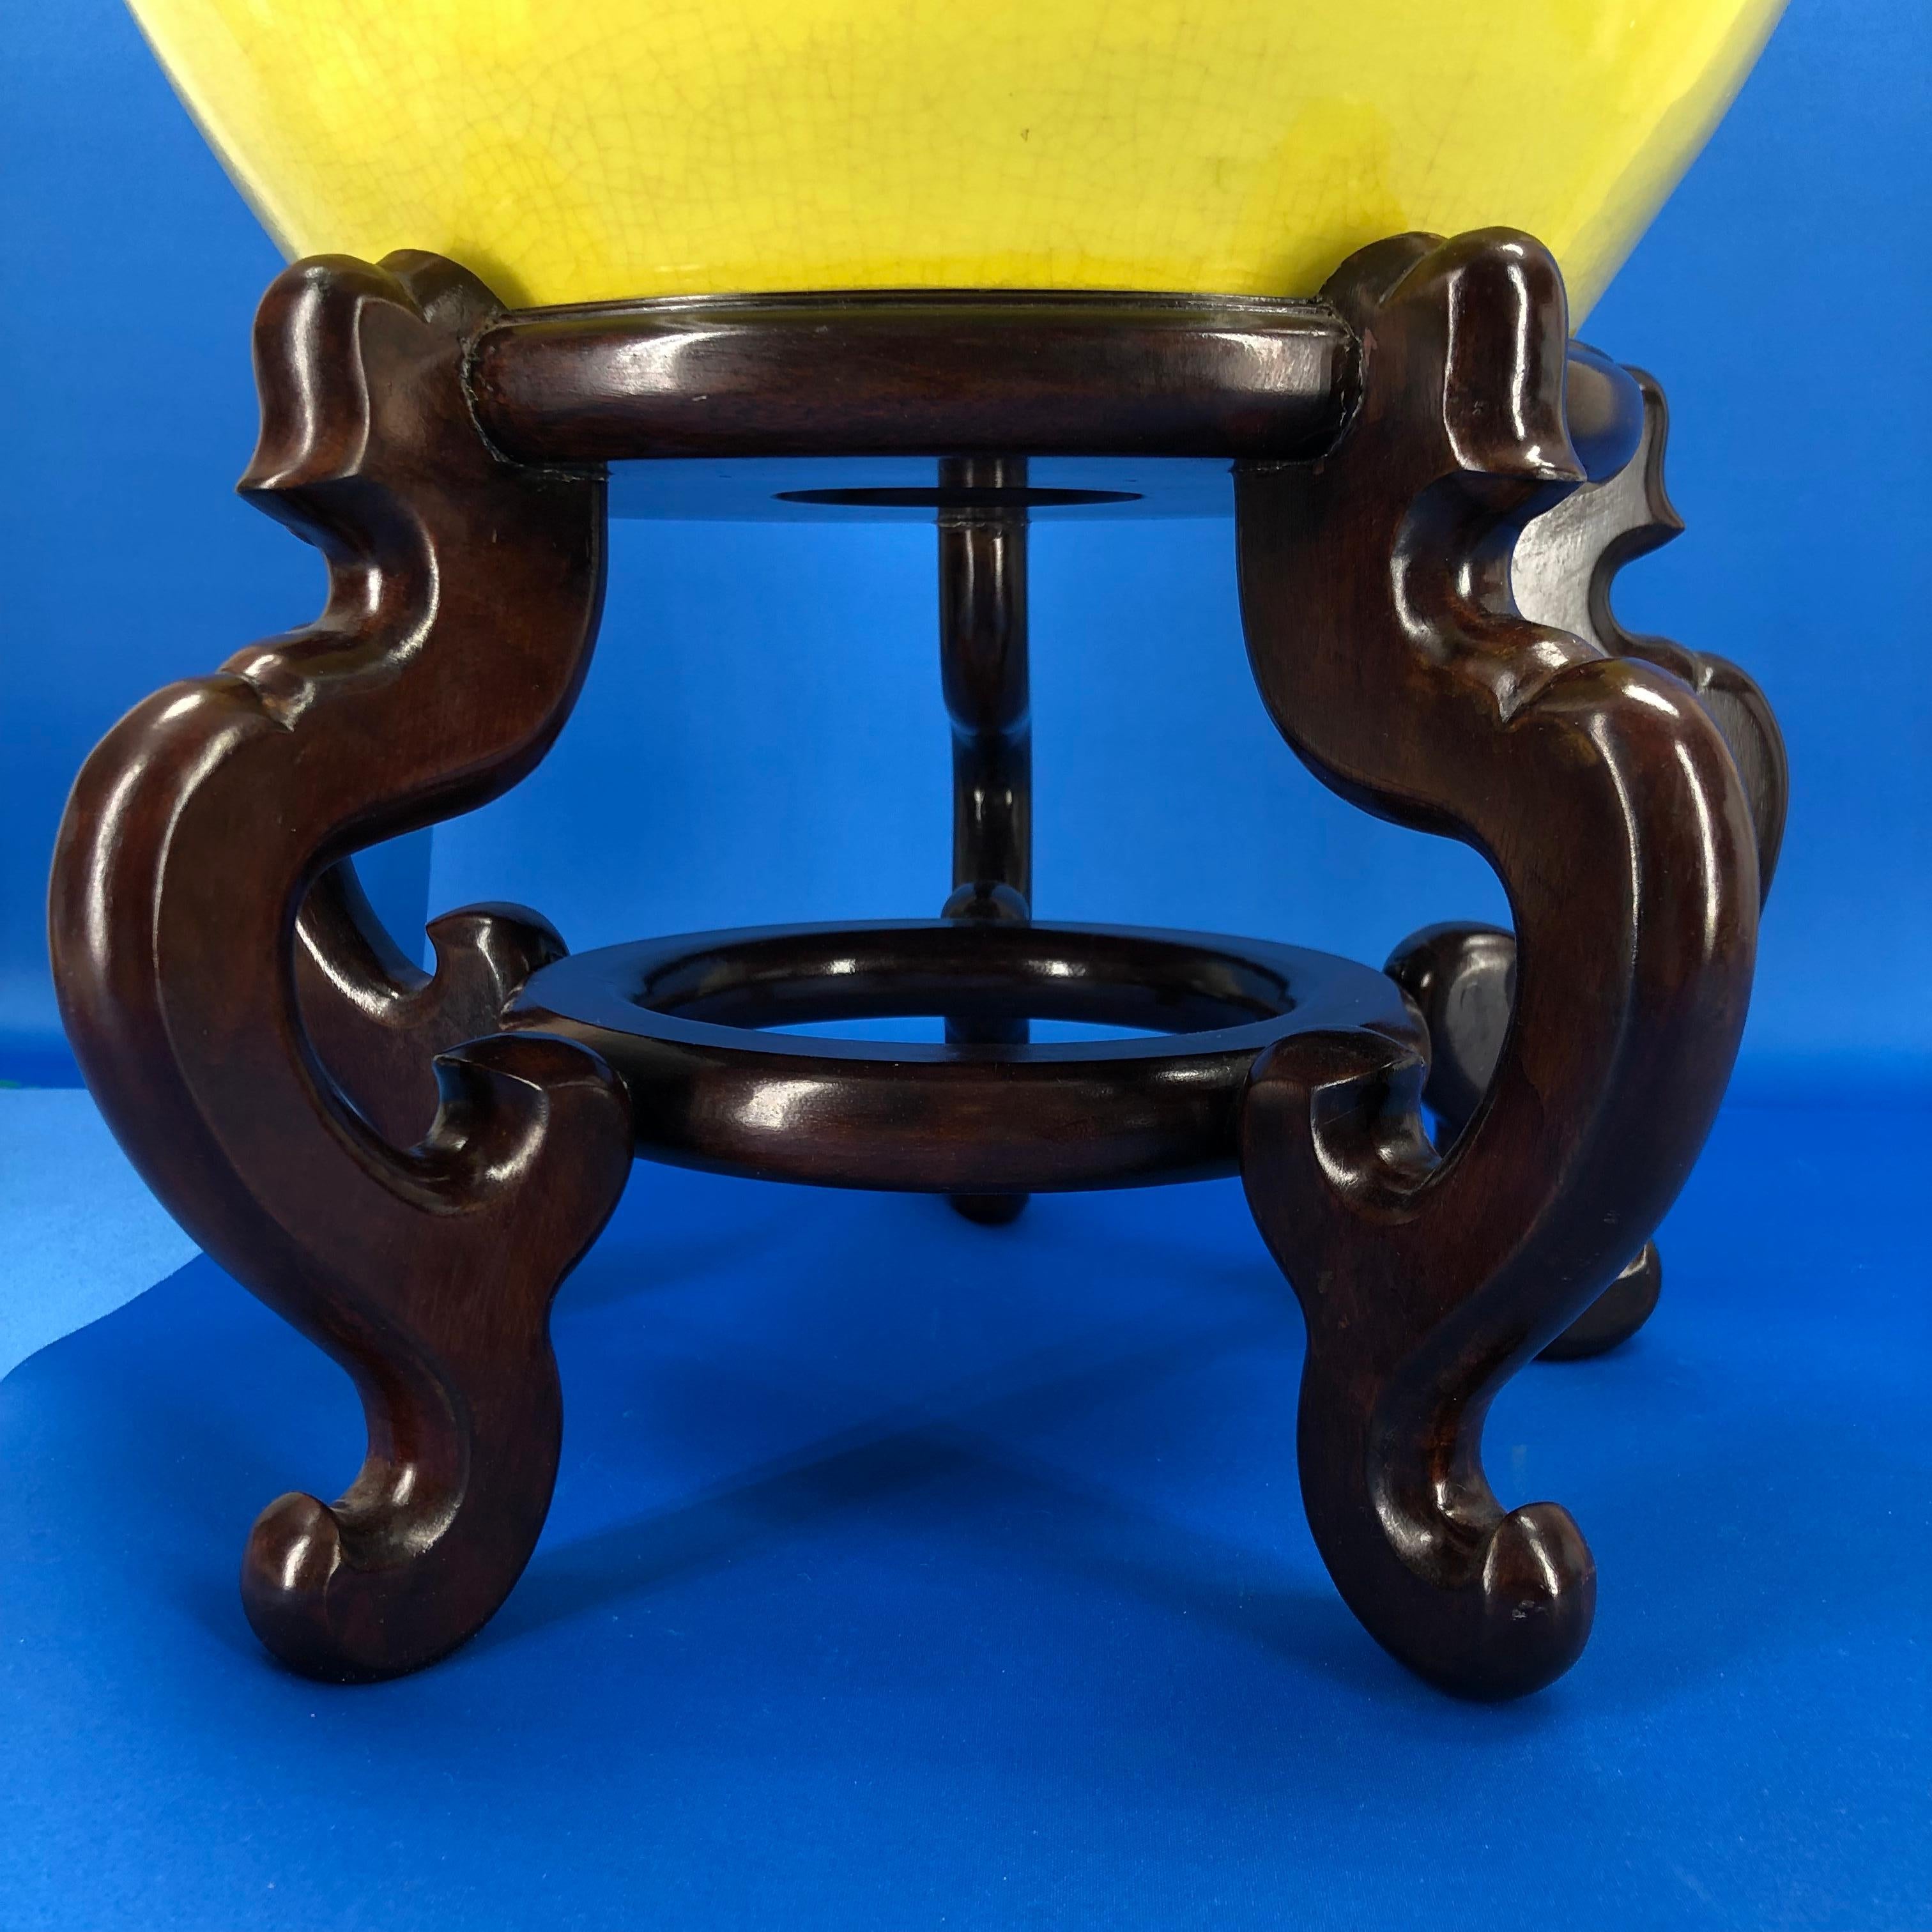 20th Century Large Bright Yellow Hand Painted Porcelain Jardinière Bowl on a Wooden Stand For Sale